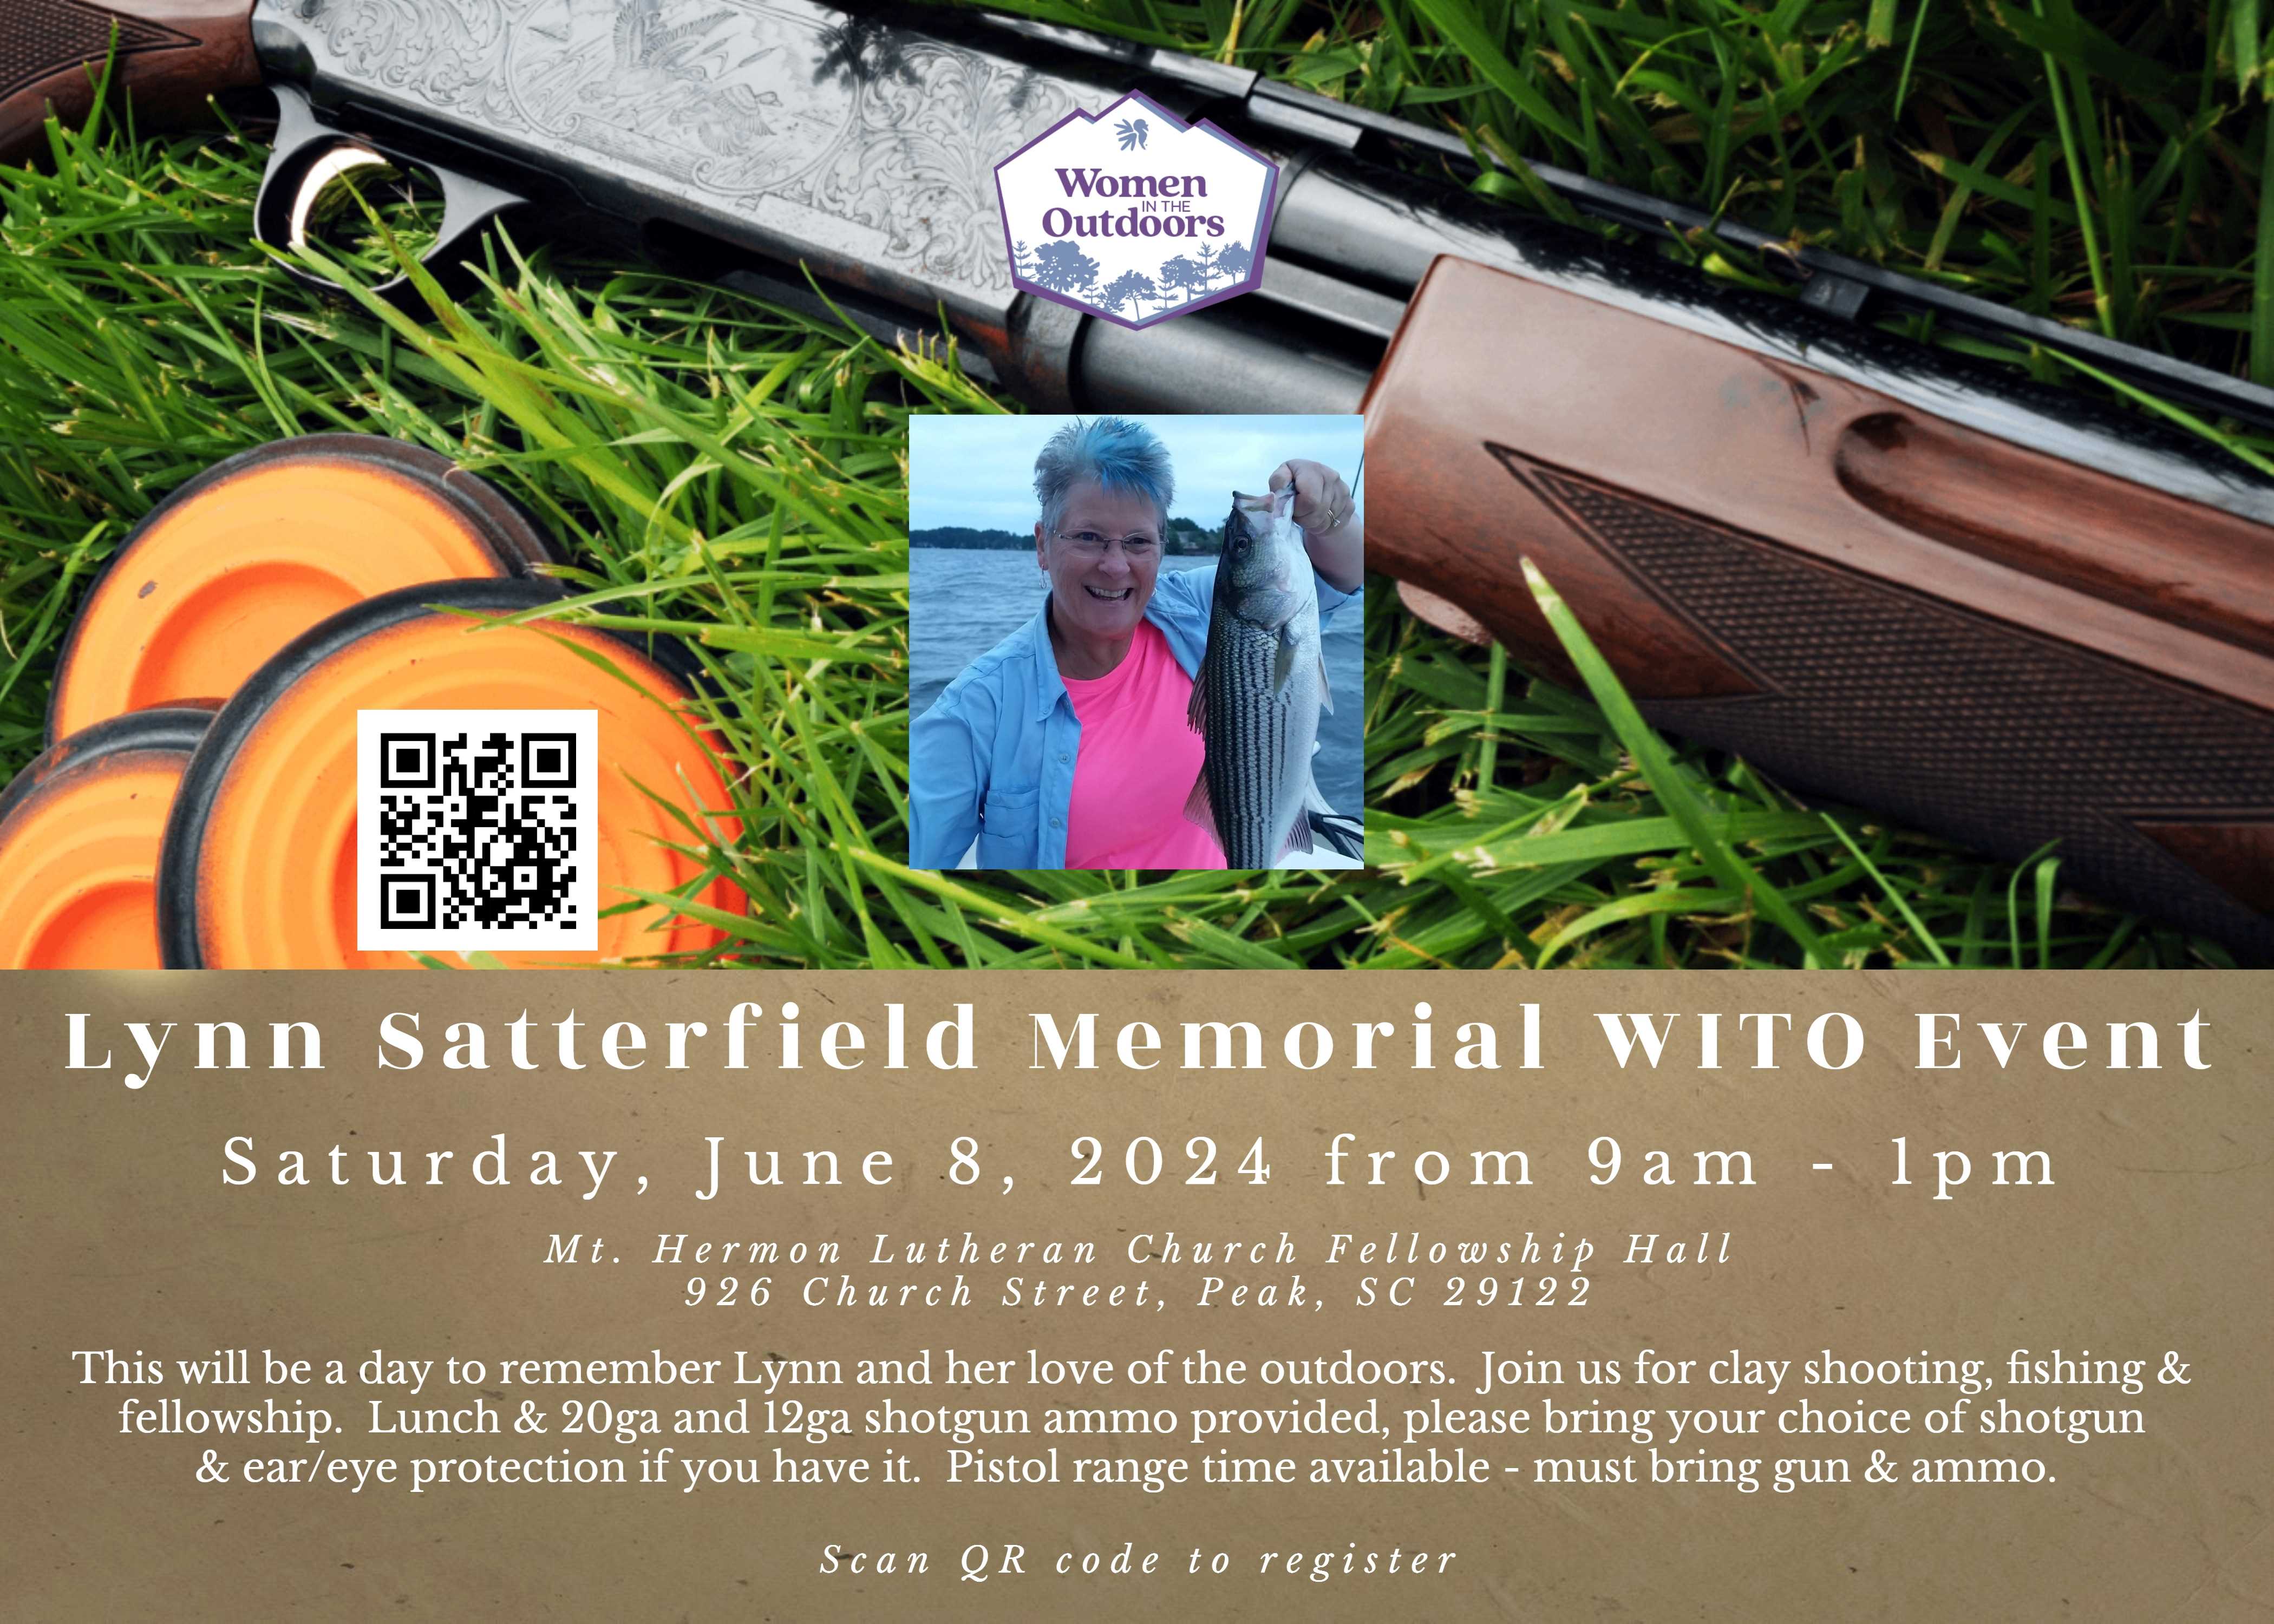 Lynn Satterfield Memorial WITO Event @ Mt Hermon Lutheran Chruch